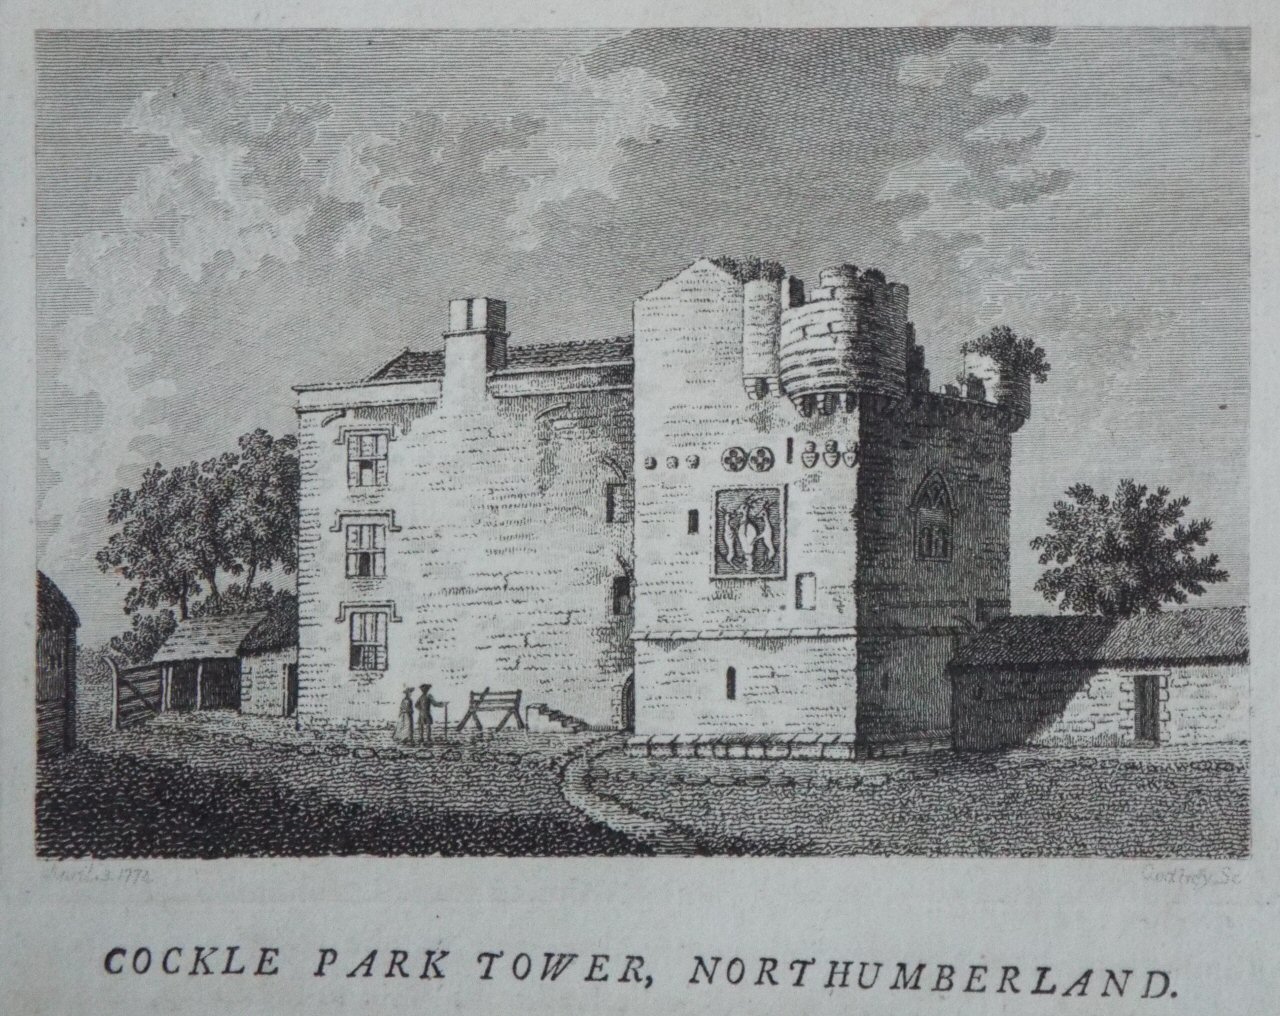 Print - Cockle Park Tower, Northumberland. - 